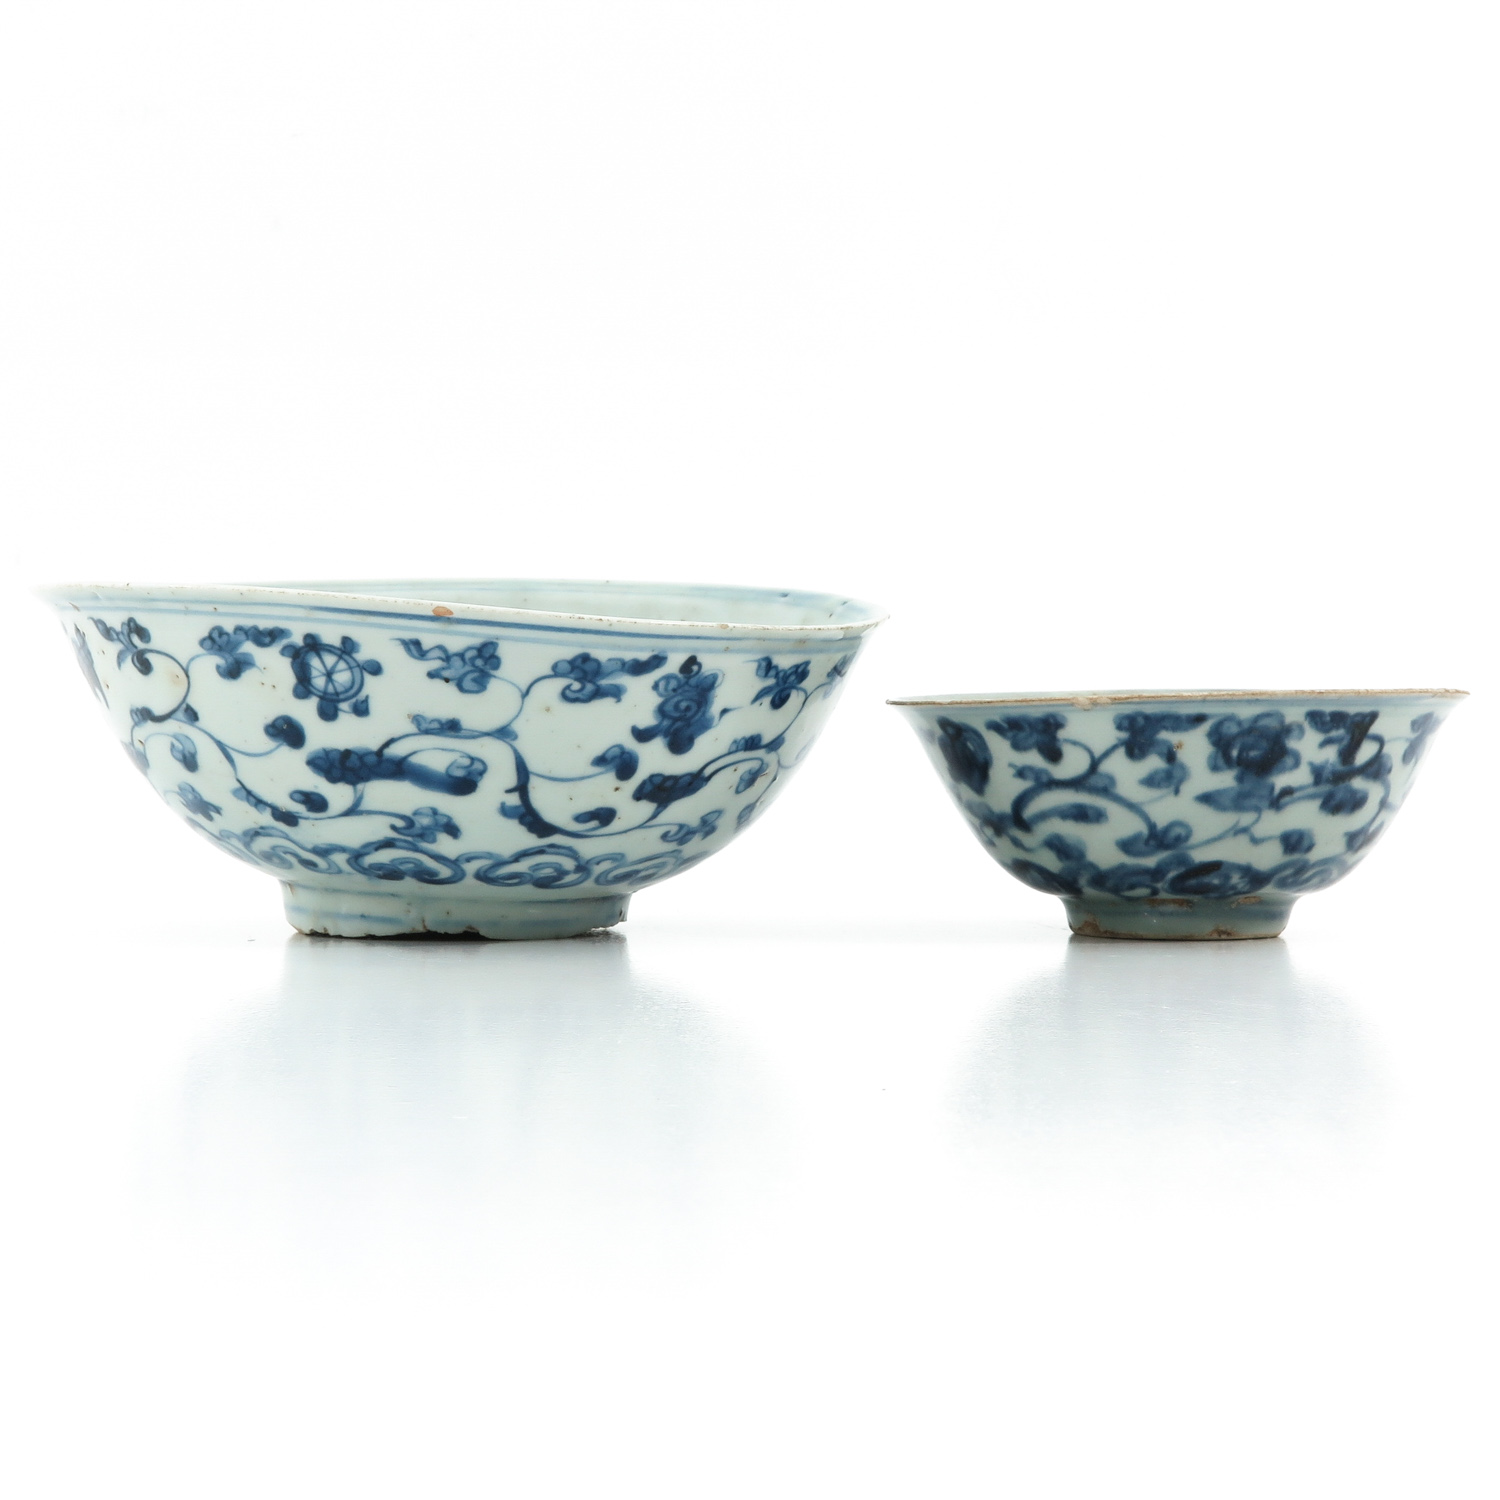 A Lot of 2 Blue and White Bowls - Image 3 of 10